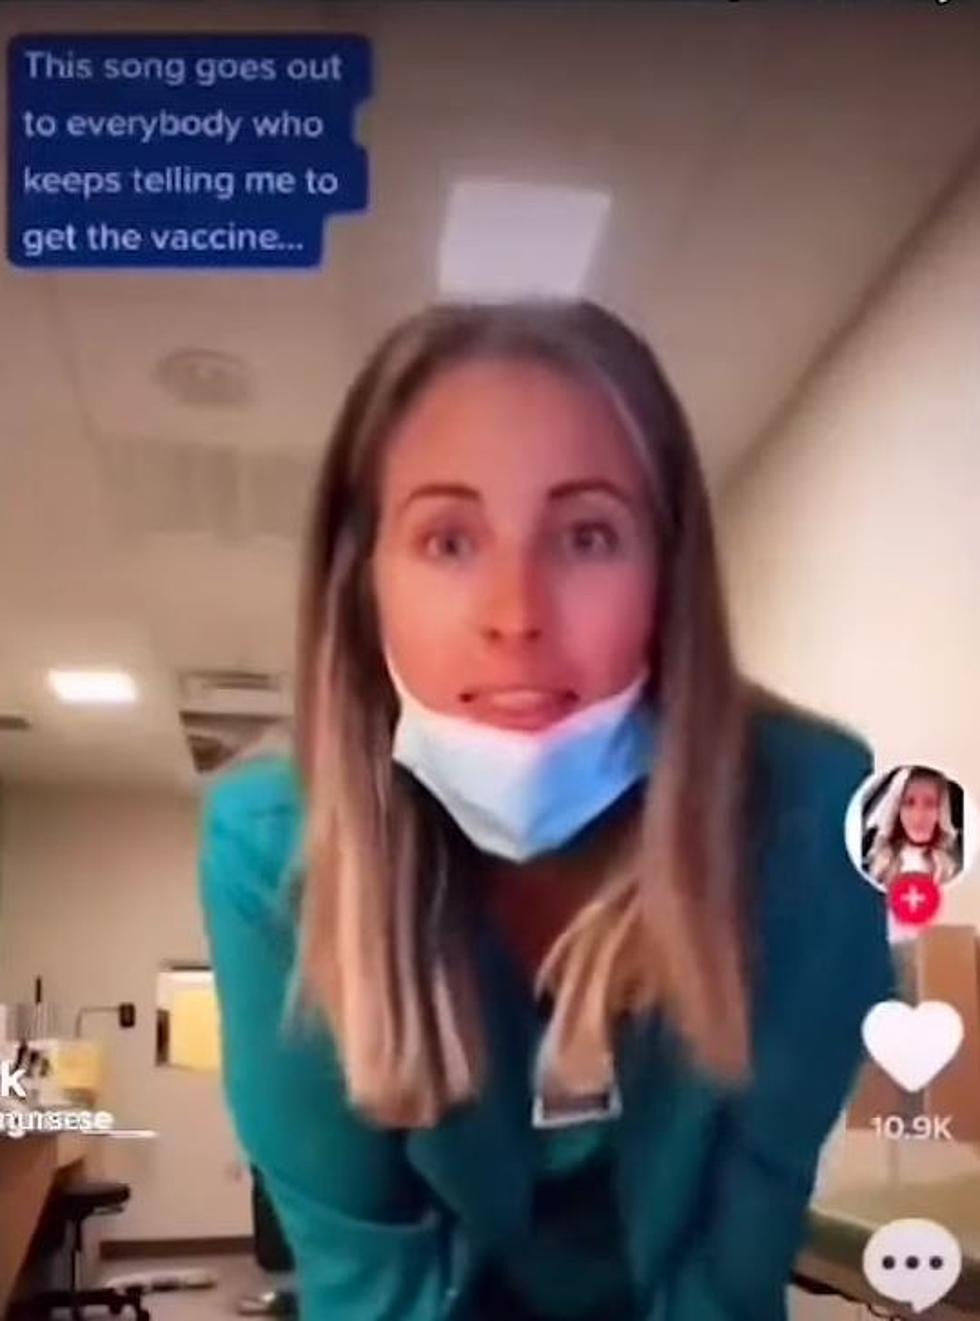 Grand Rapids Nurse Goes Viral with Anti-Vaccine and Anti-Mask Vid